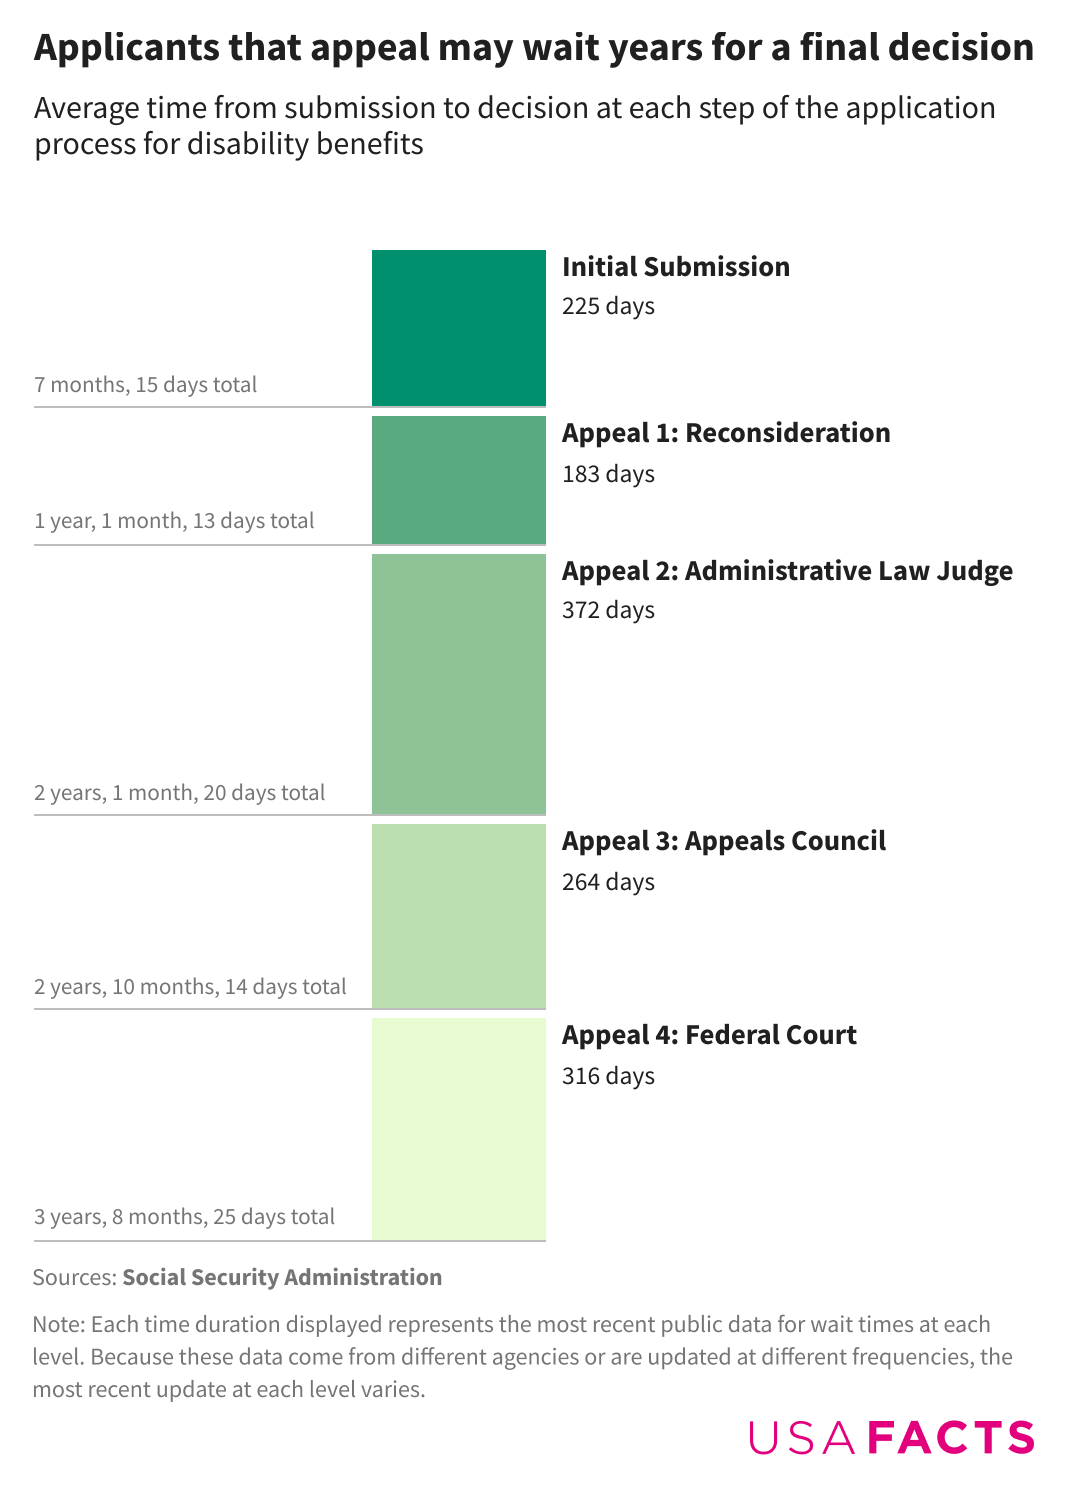 A timeline indicating how long the wait is at each step of appeal. It reads: Initial Submission, 225 days or 7 months, 15 days total. Appeal 1: Reconsideration, 183 days, cumulative total of 1 year, 1 month and 13 days. Appeal 2: Administrative Law Judge, 372 days, with a cumulative total of 2 years, 1 month, 20 days. Appeal 3: Appeals Council, 264 days, cumulative total of 2 years, 10 months, 14 days. Appeal 4: Federal Court, 316 days, cumulative total of 3 years, 8 months, 25 days